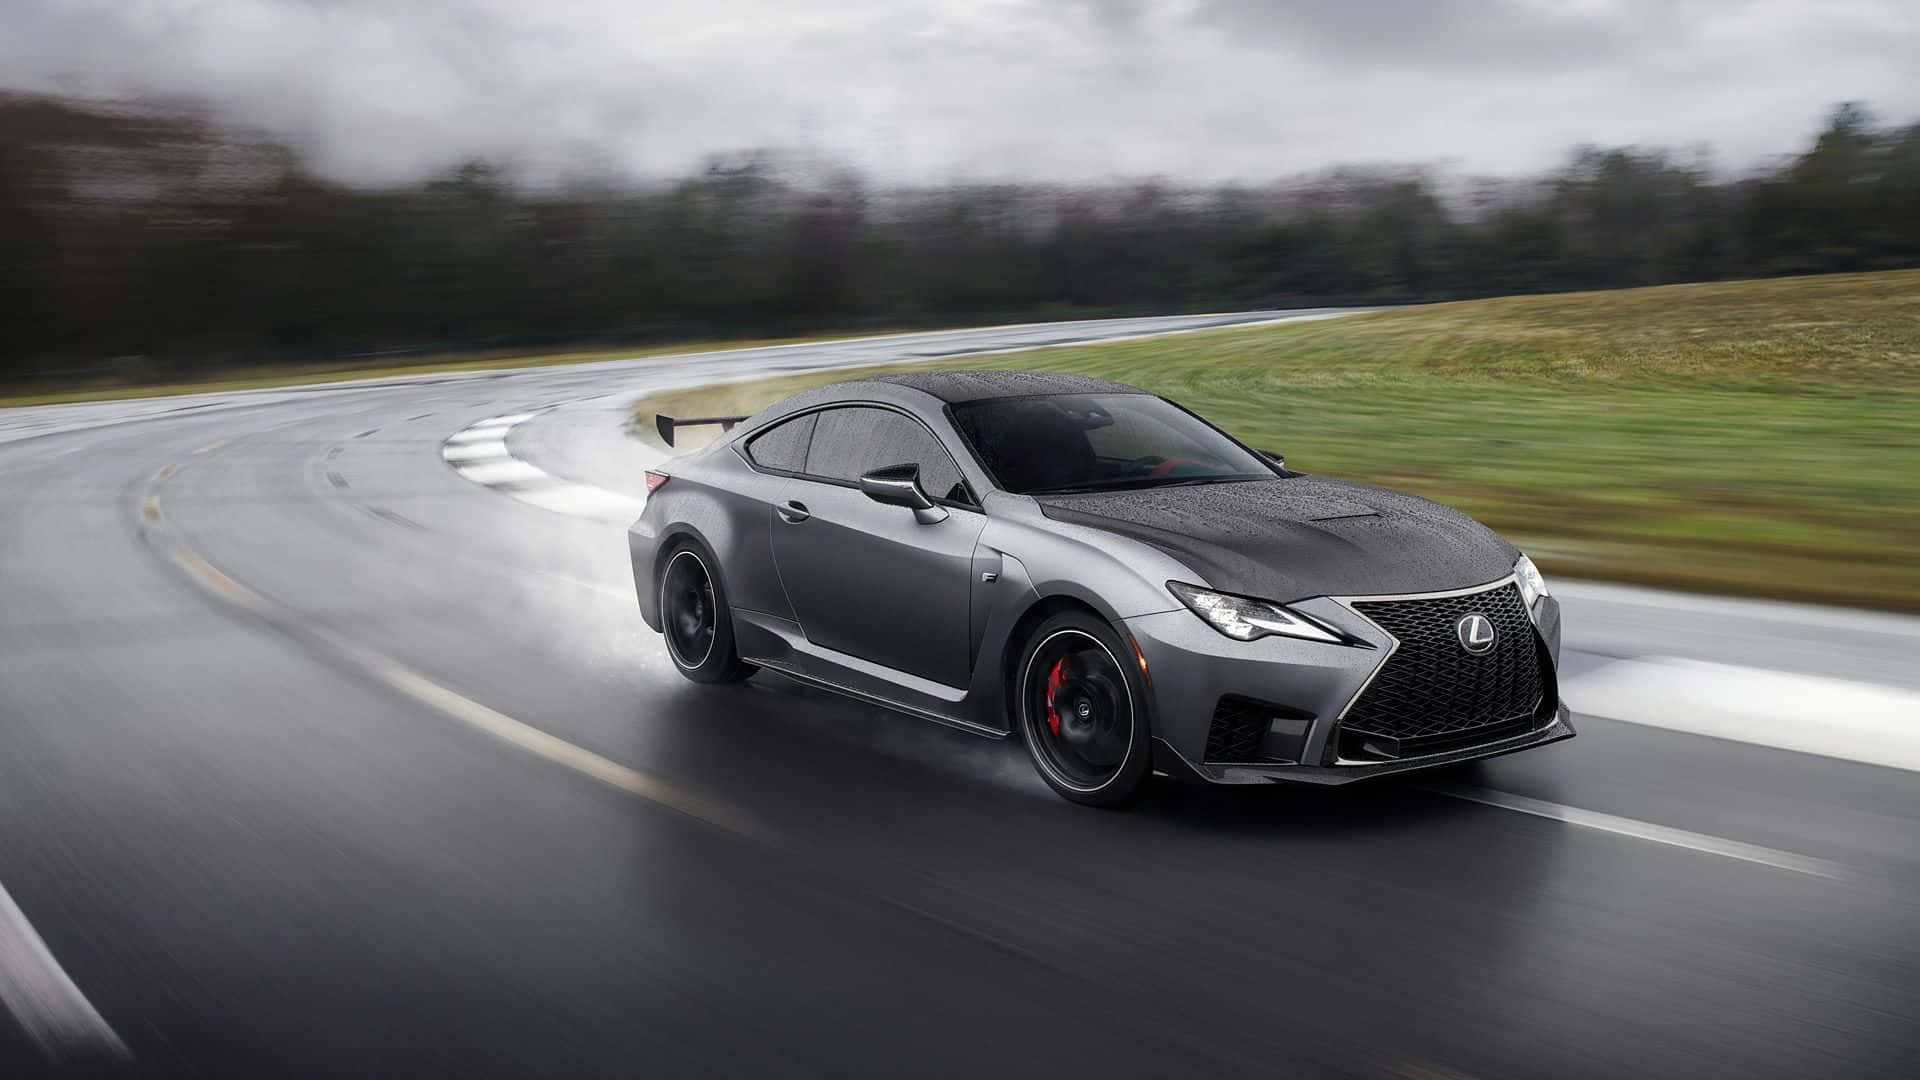 Executive Style Meets Raw Power: The Lexus Rc Coupe In Vibrant Action Wallpaper